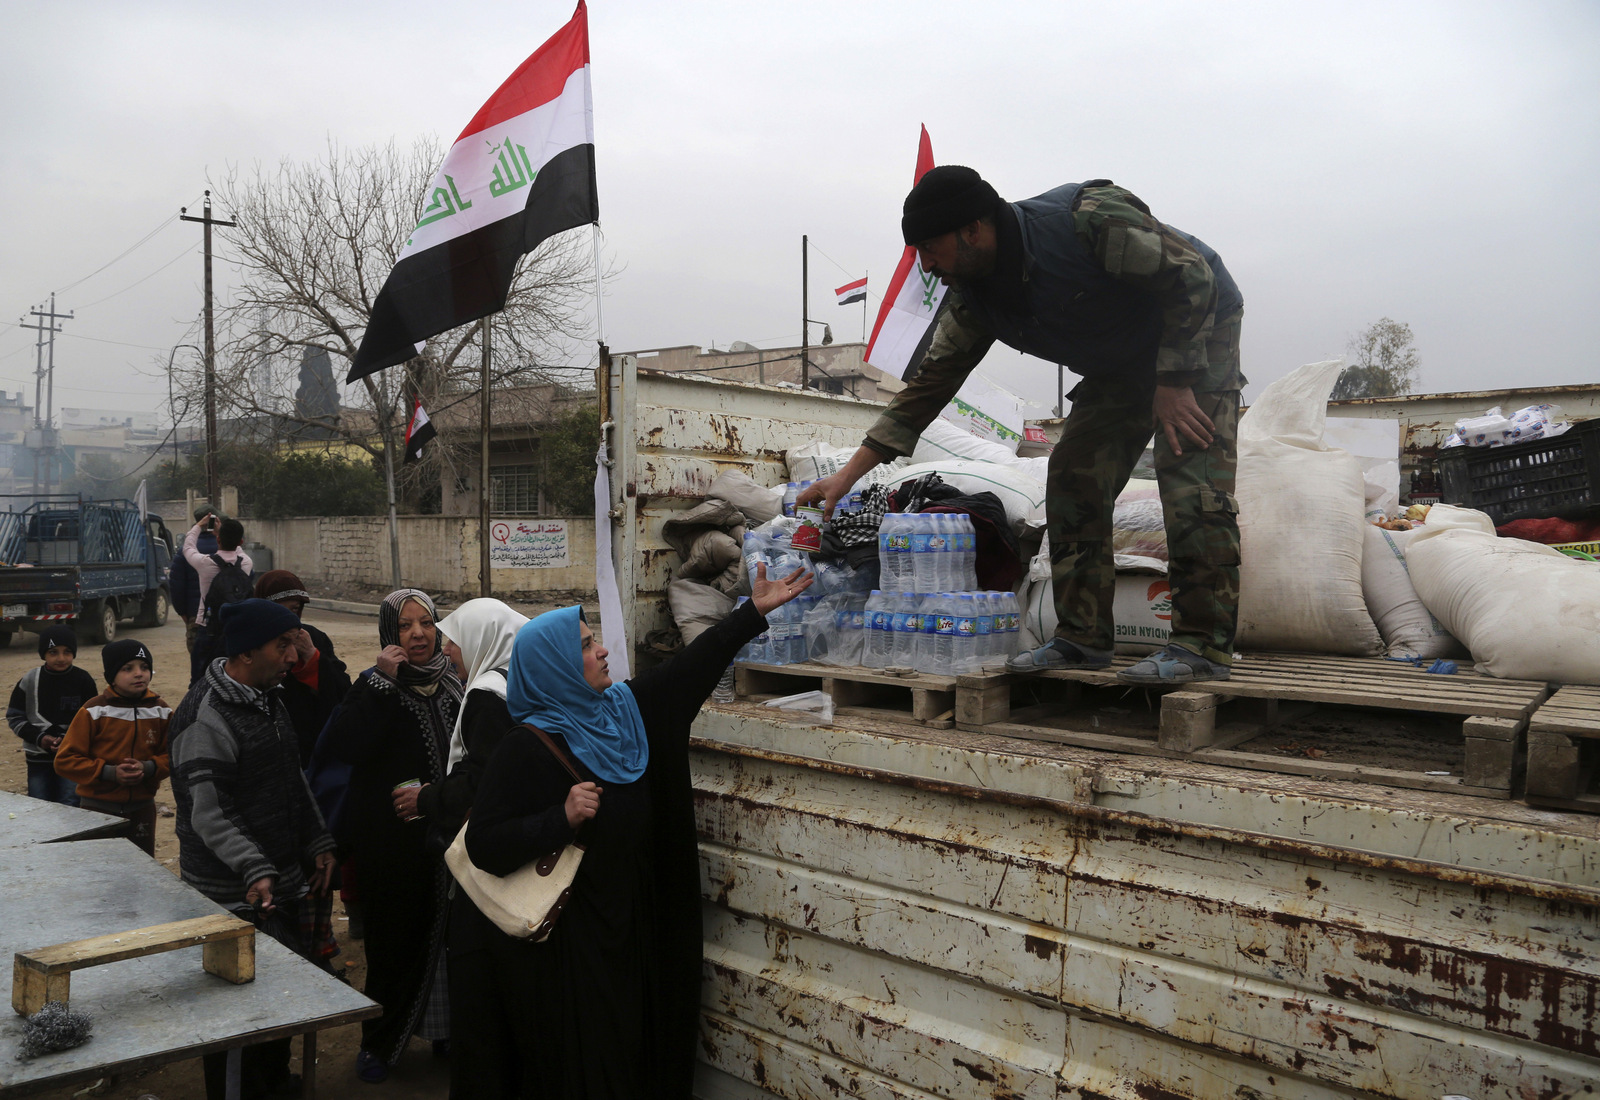 Shiite volunteer fighters of the Popular Mobilization Forces (Hashd al-Shaabi) distribute food to the residents in a neighborhood recently liberated from ISIS militants, on the eastern side of Mosul, Iraq, Jan. 15, 2017.(AP/Khalid Mohammed)